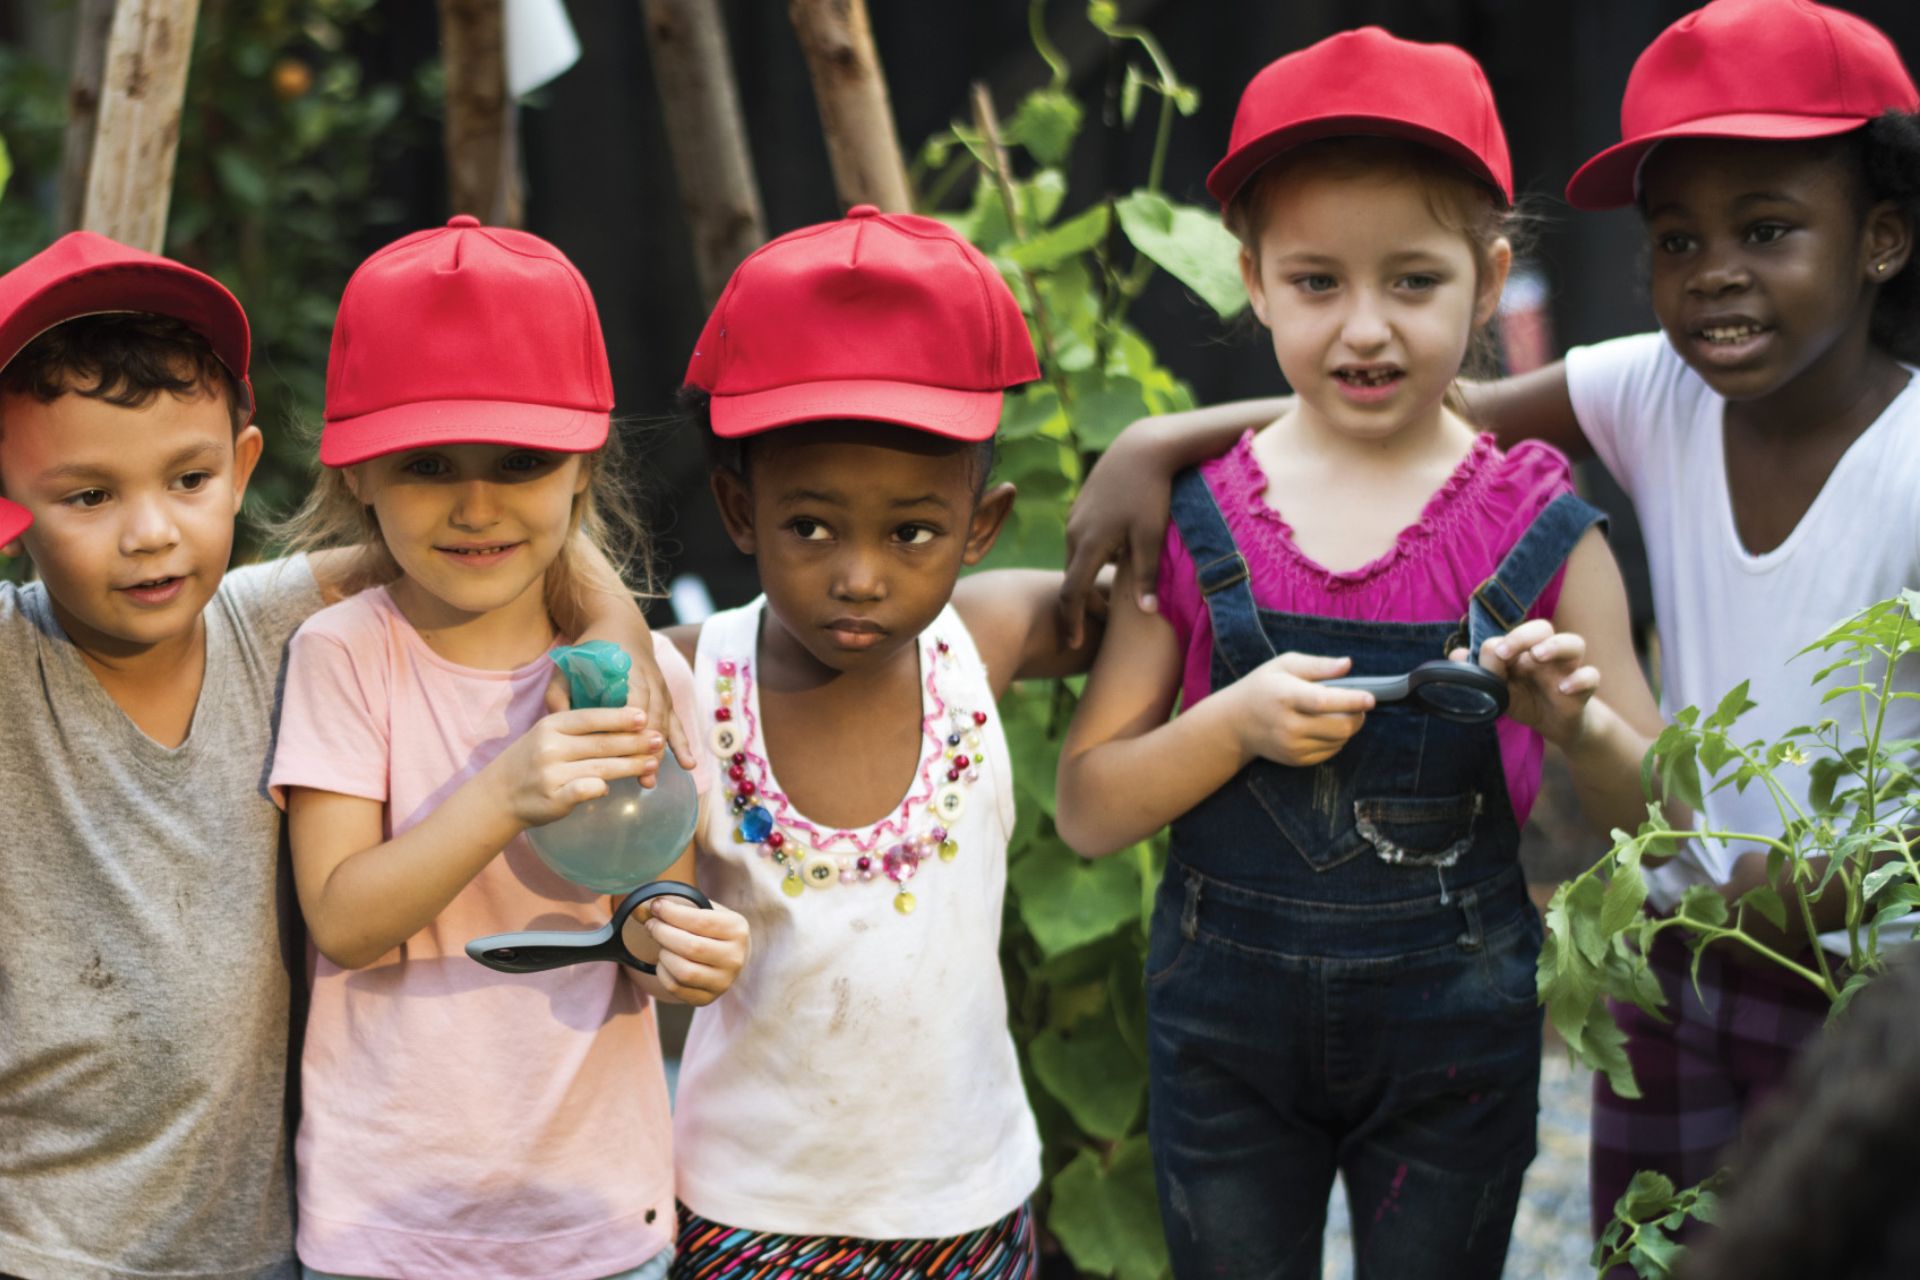 Group of five children wearing red hats holding magnifying glasses